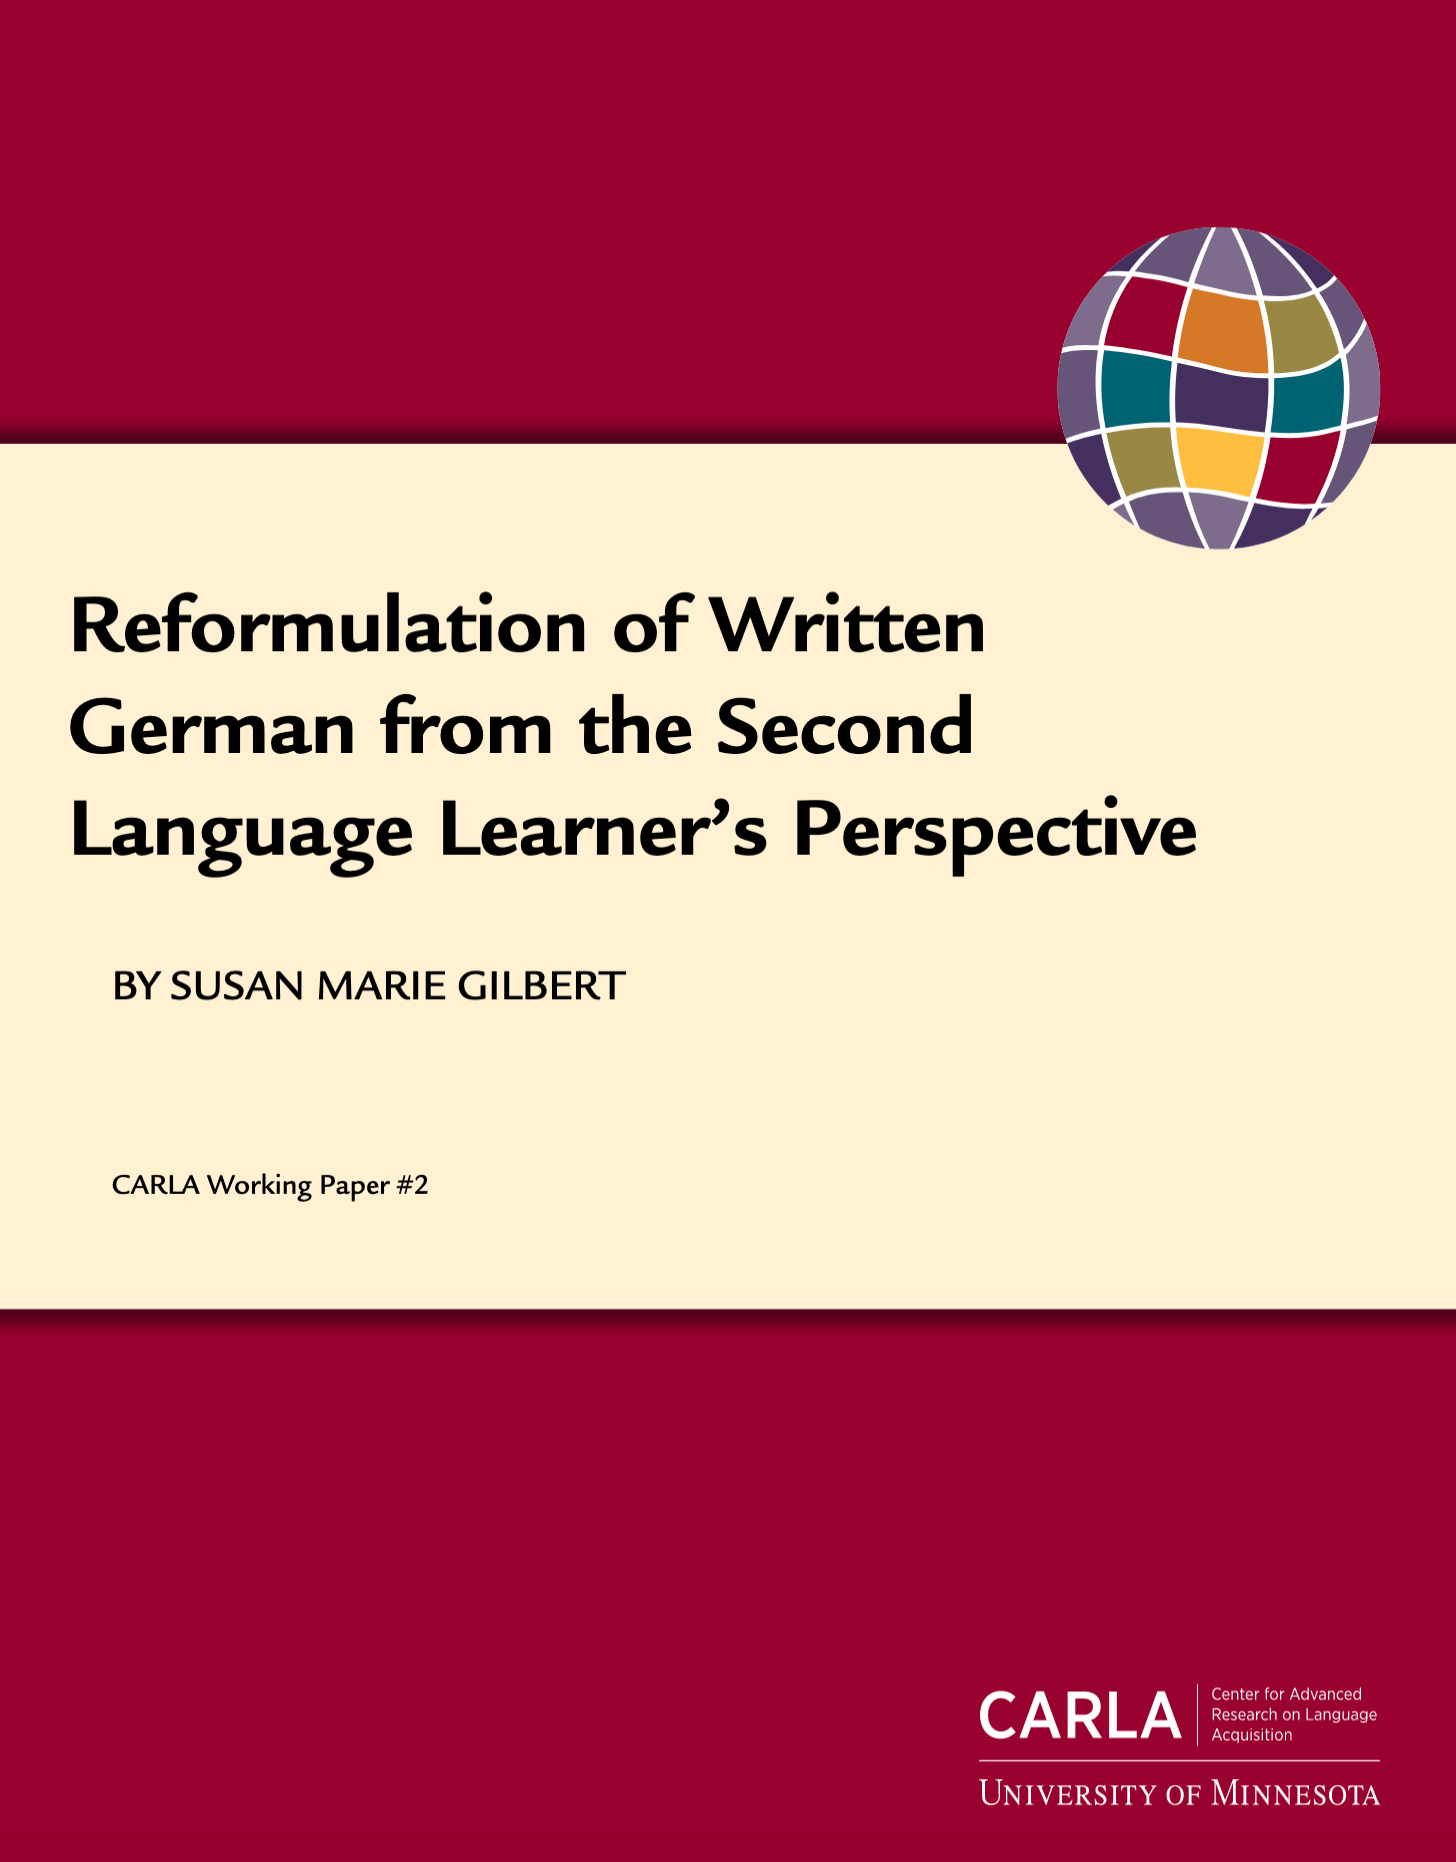 Reformulation of Written German From the Second Language Learner's Perspective